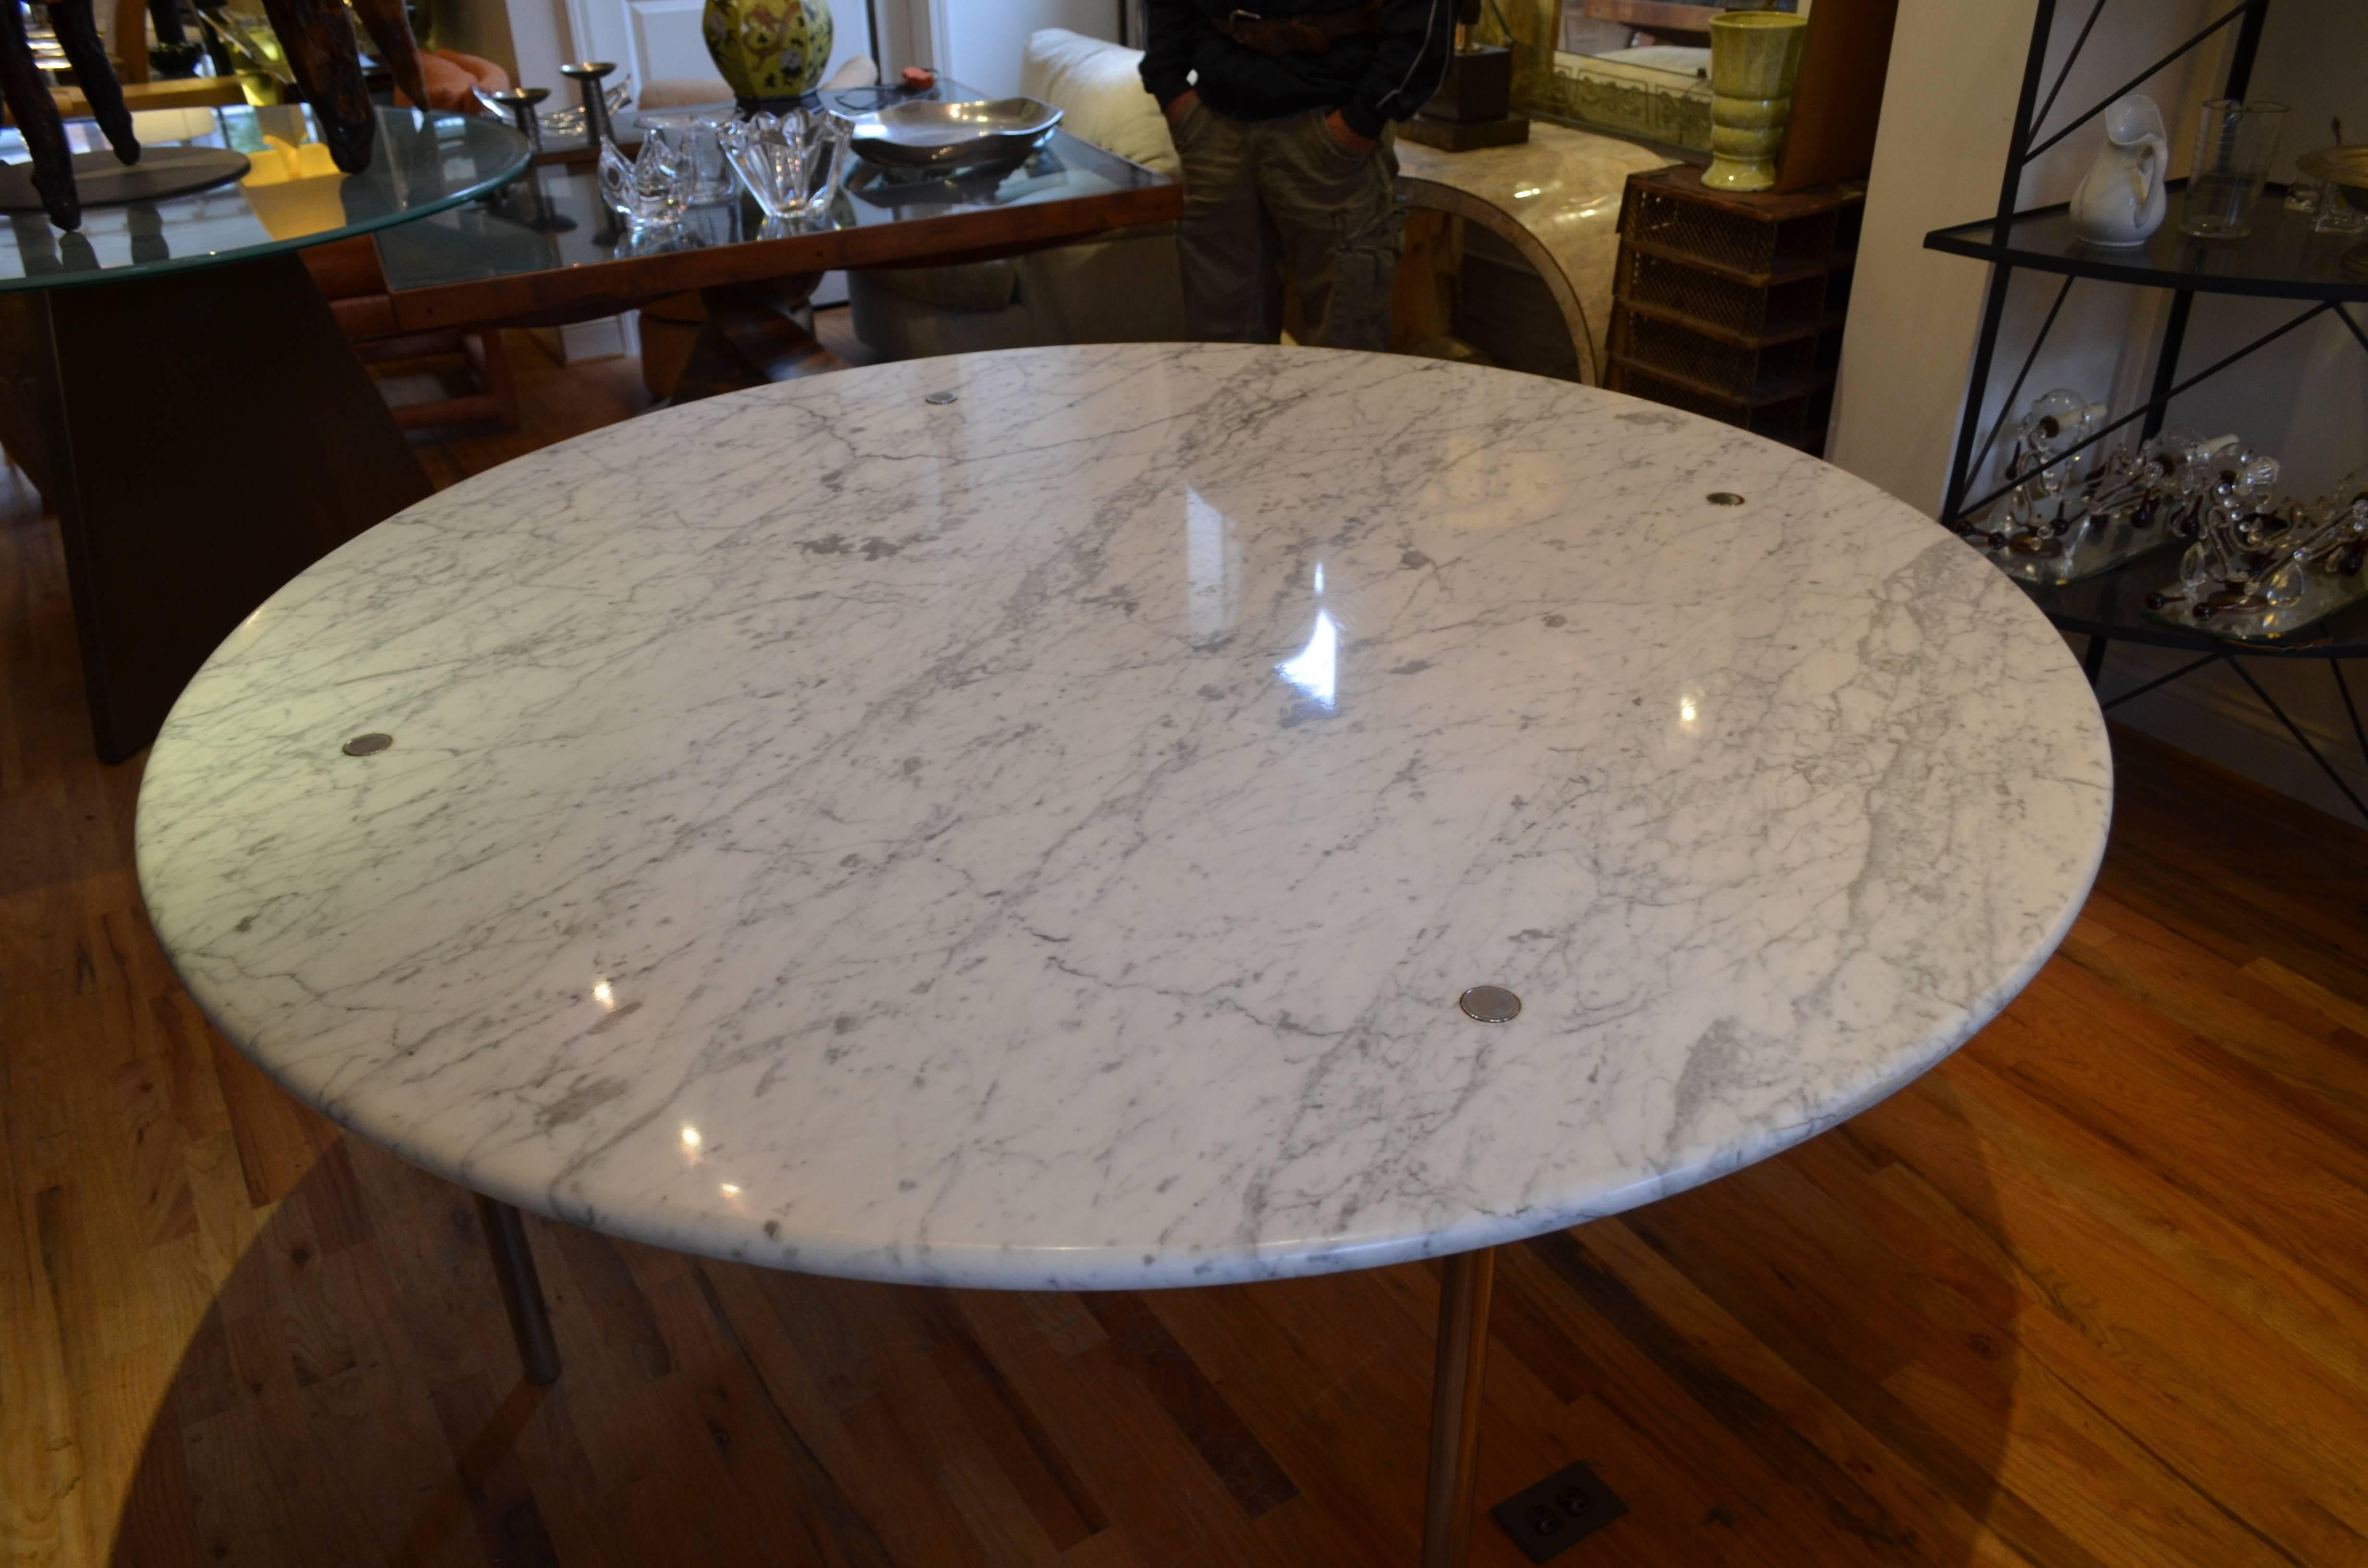 Mid-20th Century Monumental Round Marble Dining Table by Katavolos, Littell & Kelly for Laverne